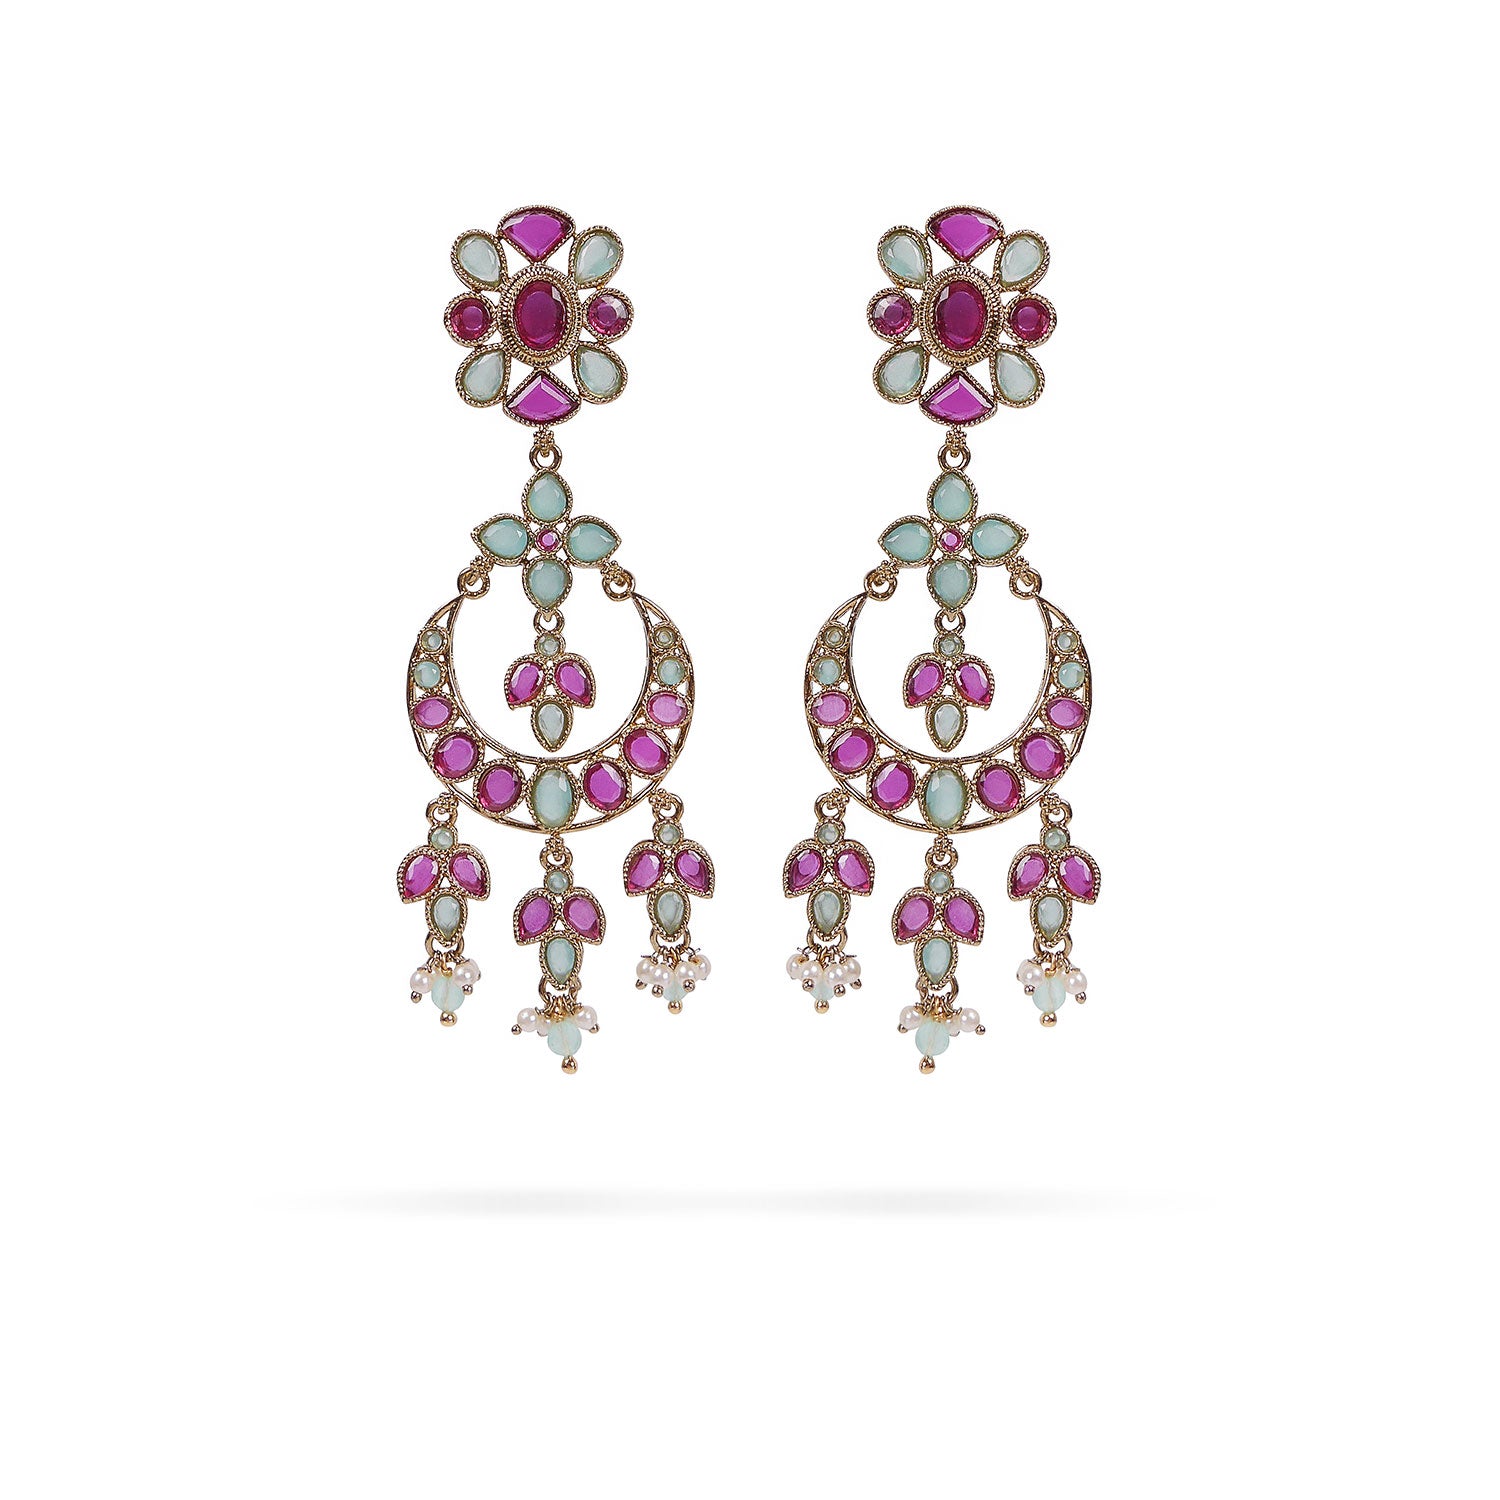 Mariana Long Crystal Earrings in Mint and Ruby